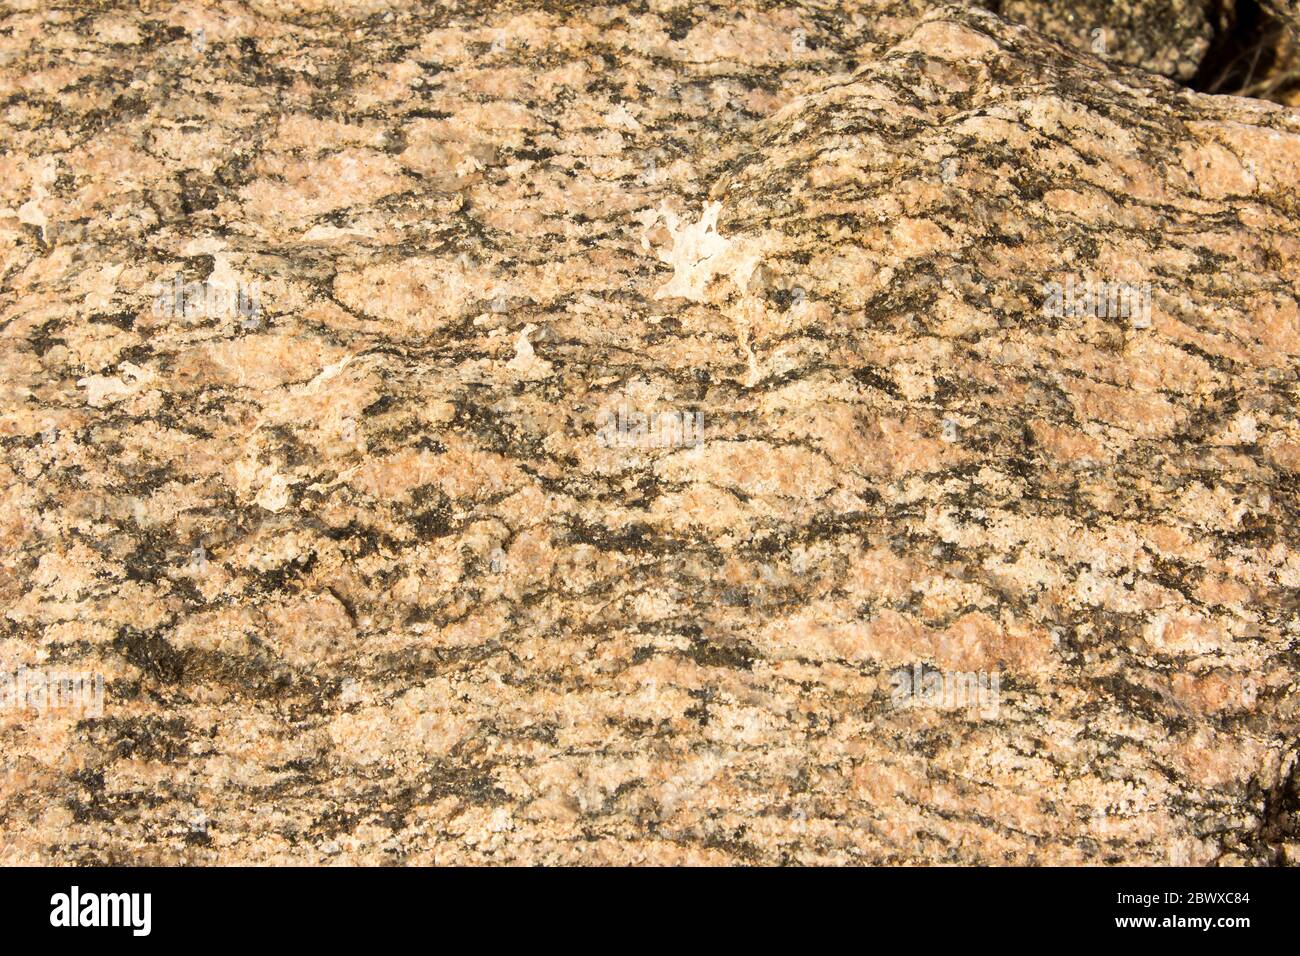 Close-up of a rough section of Augen Gneiss, showing the eyelike features which gives it its name Stock Photo